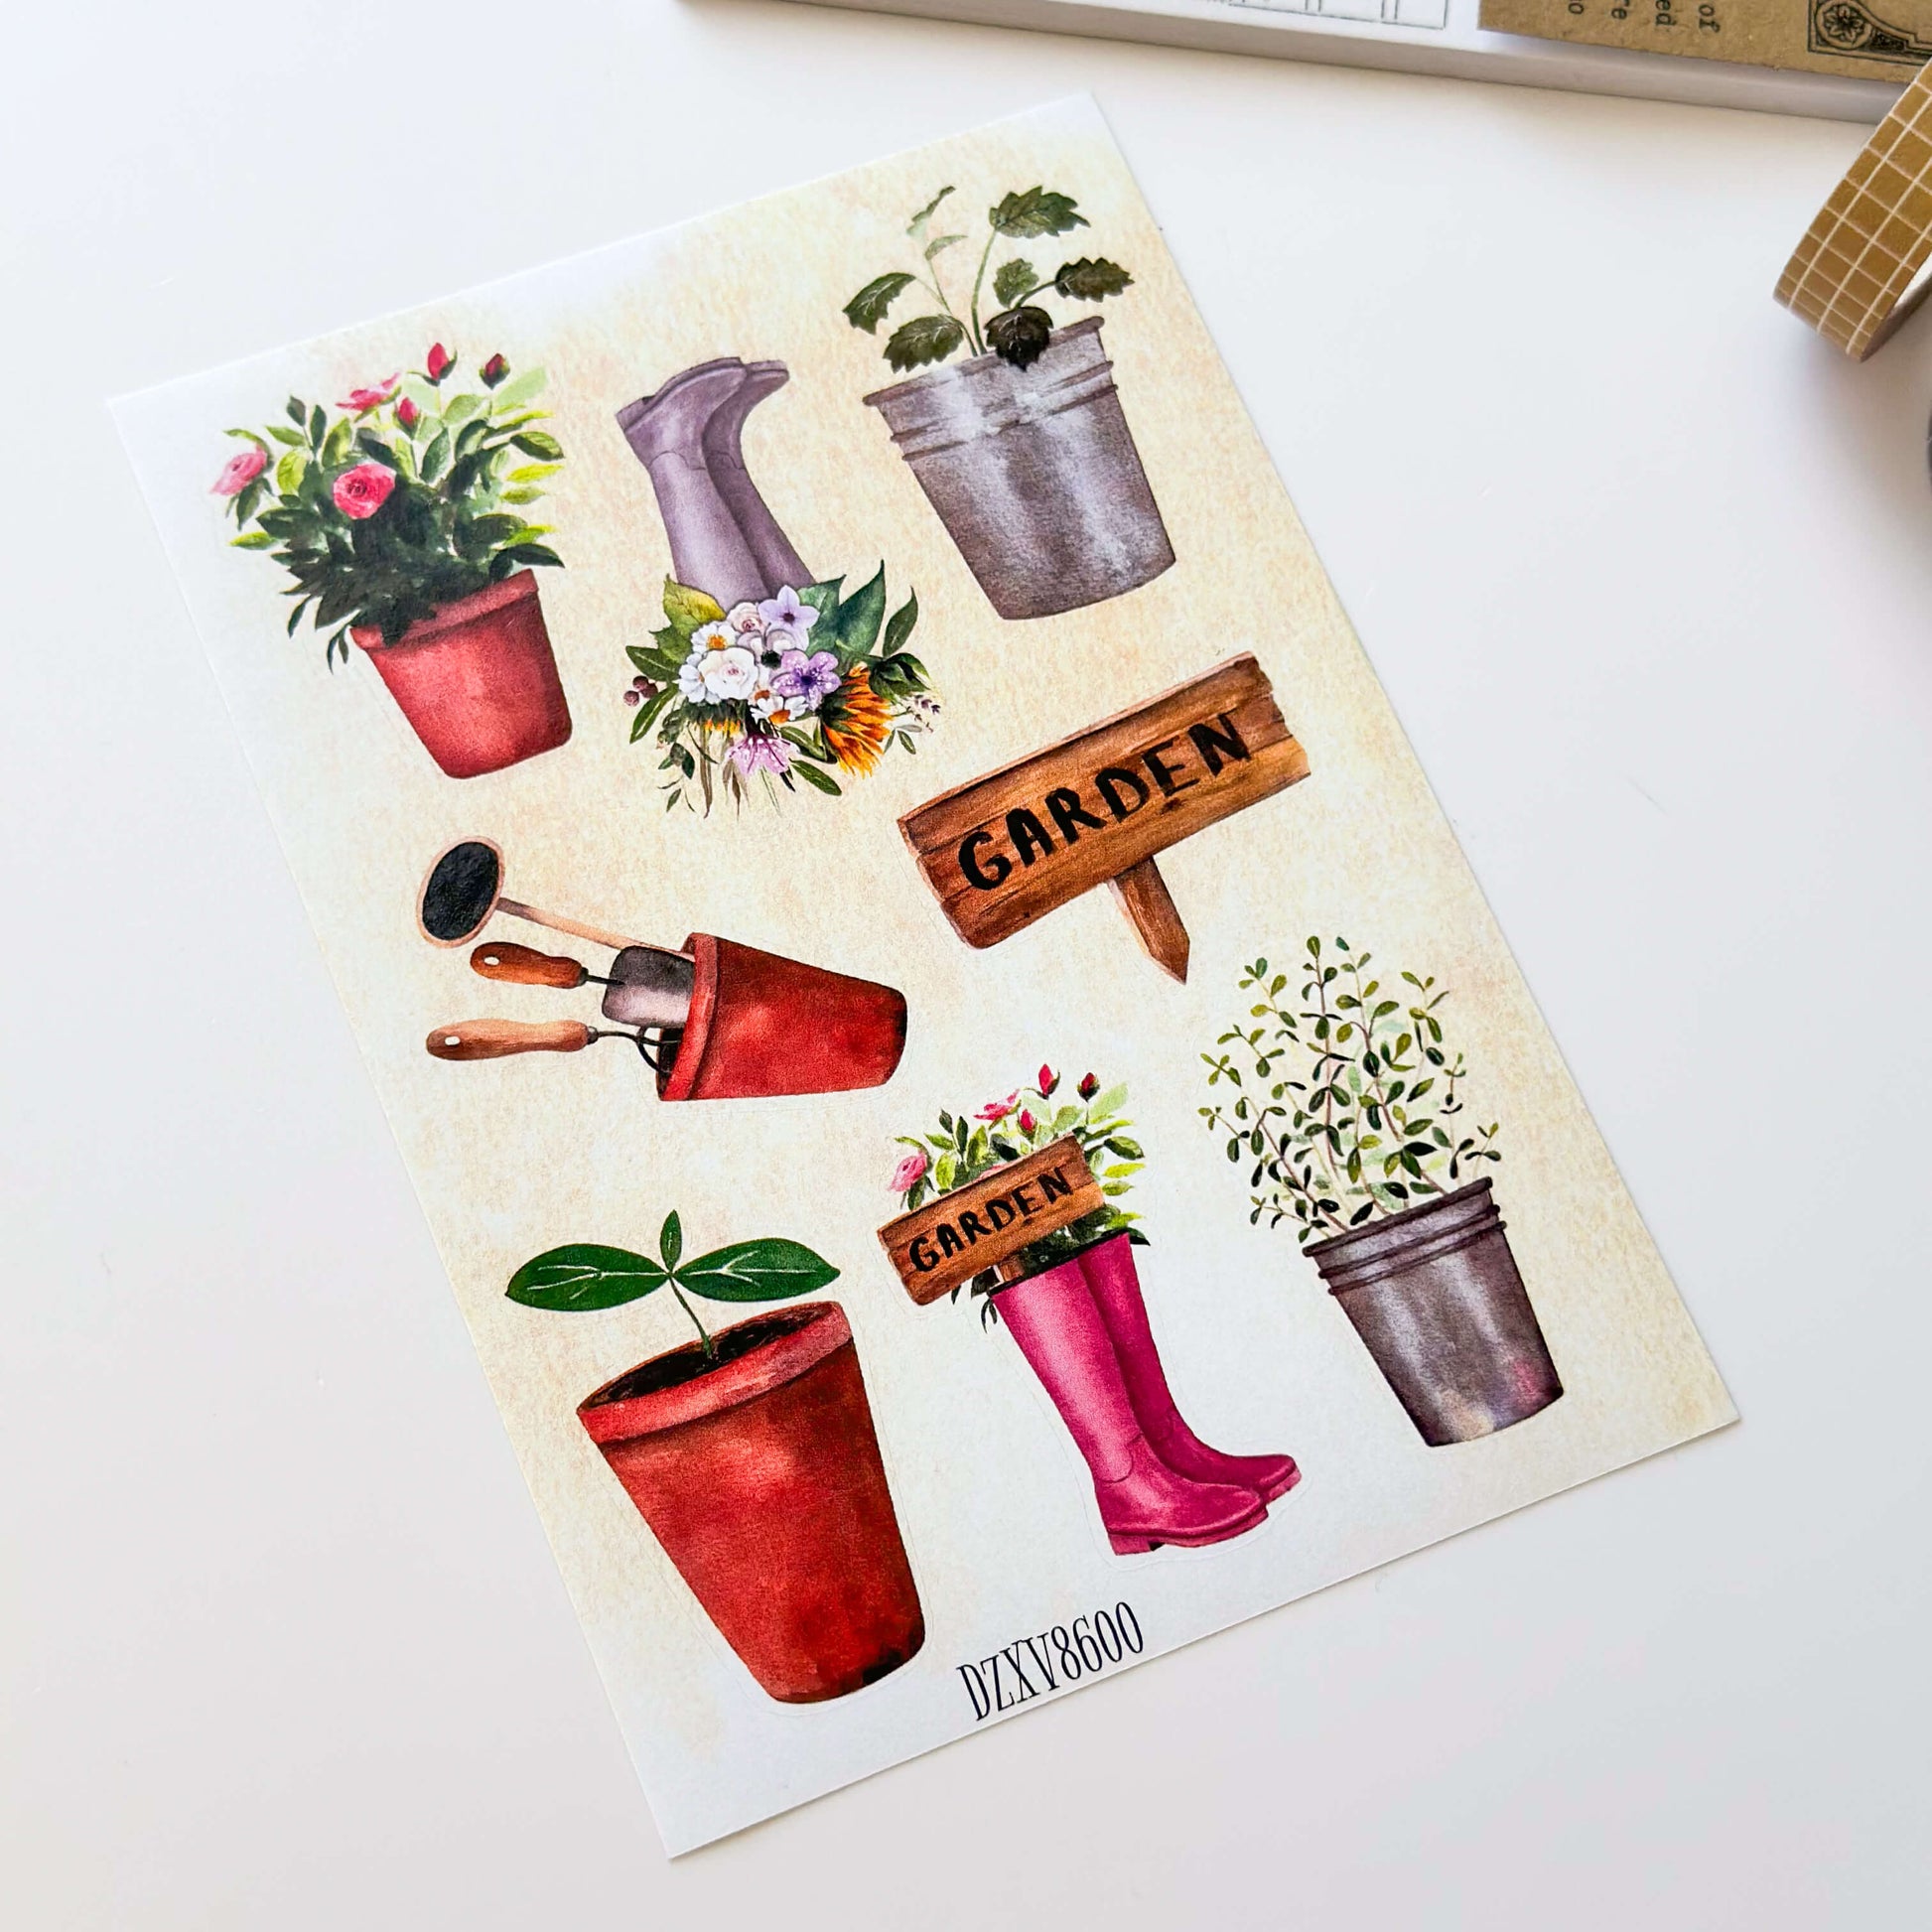 Garden sticker sheet with illustrations of garden boots and plants